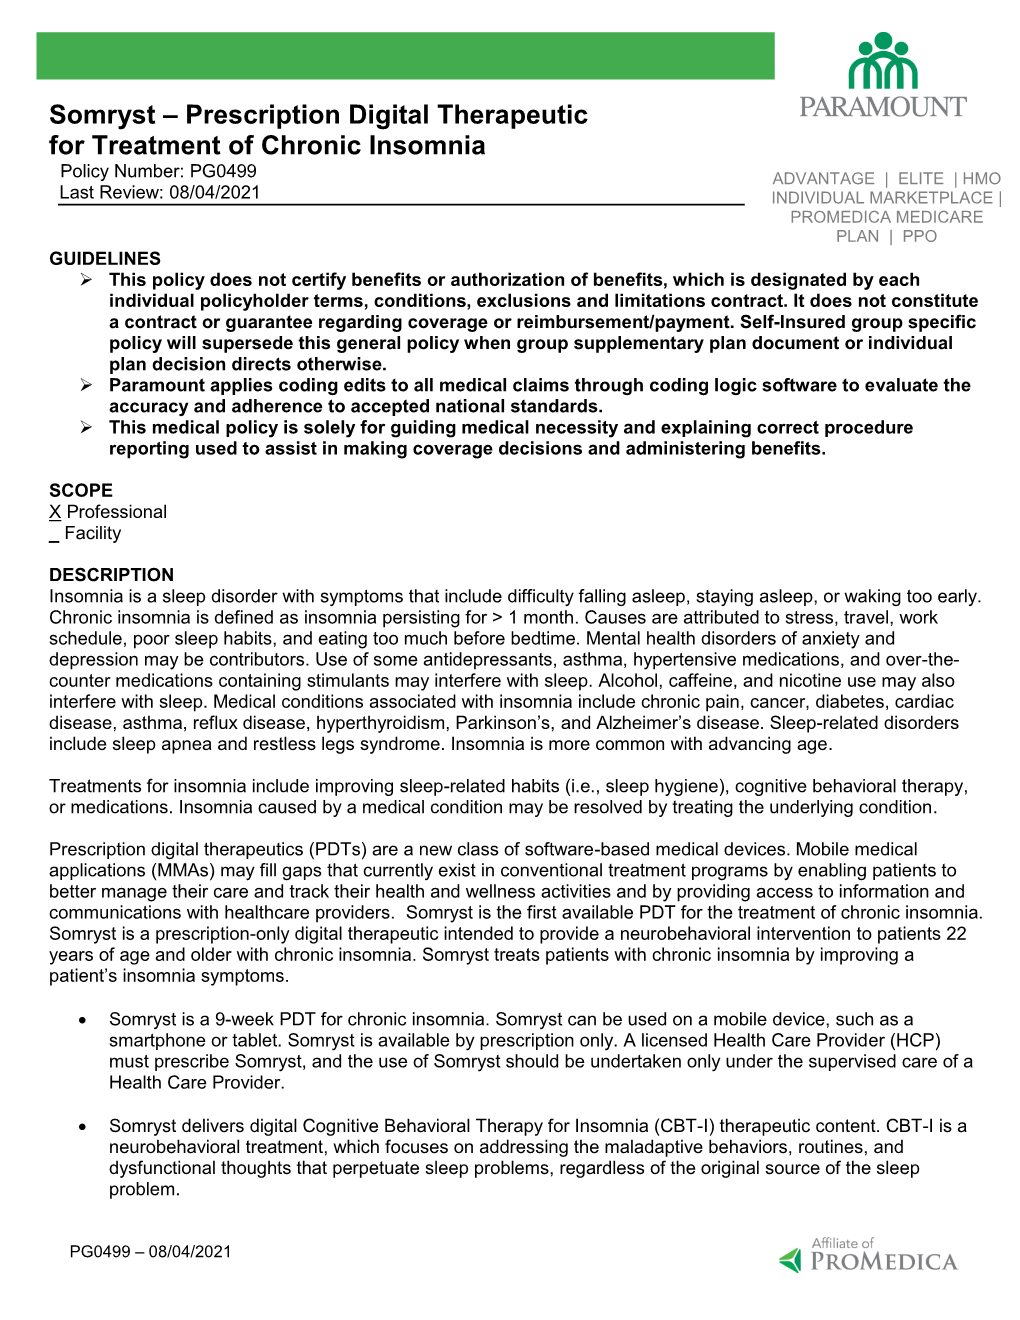 Somryst – Prescription Digital Therapeutic for Treatment of Chronic Insomnia Policy Number: PG0499 ADVANTAGE | ELITE | HMO Last Review: 08/04/2021